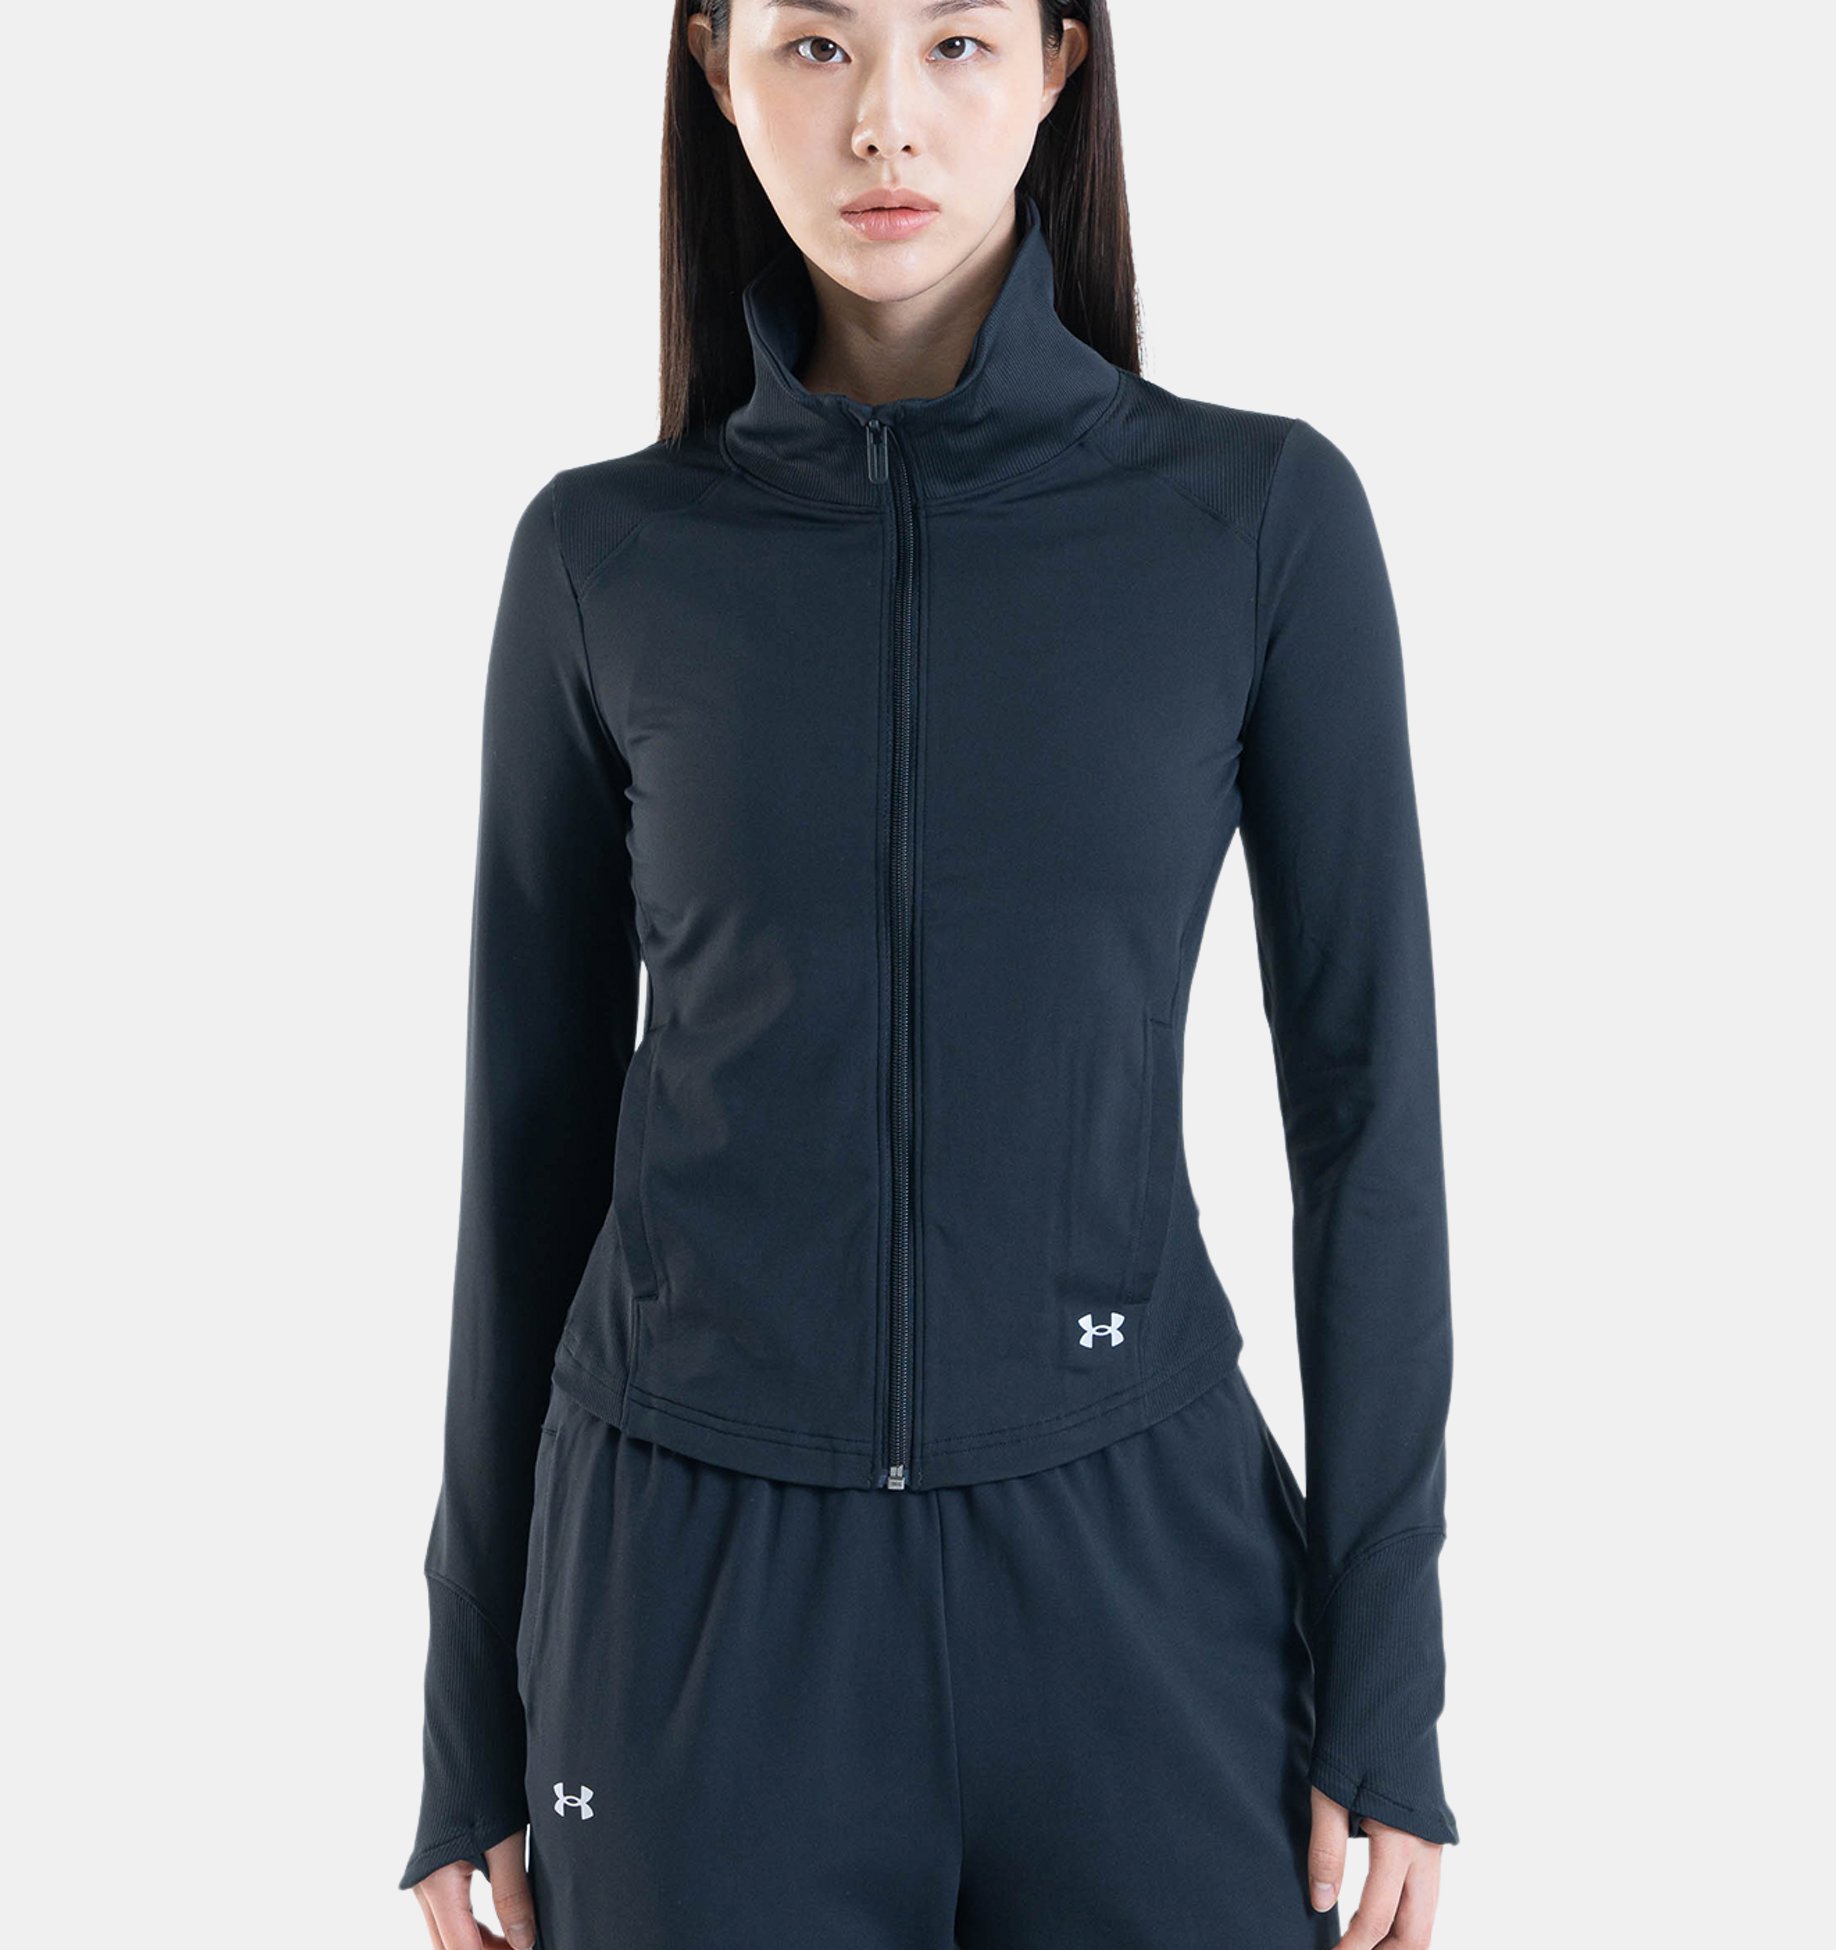 Order Online UA Meridian Jacket Novelty From Under Armour India